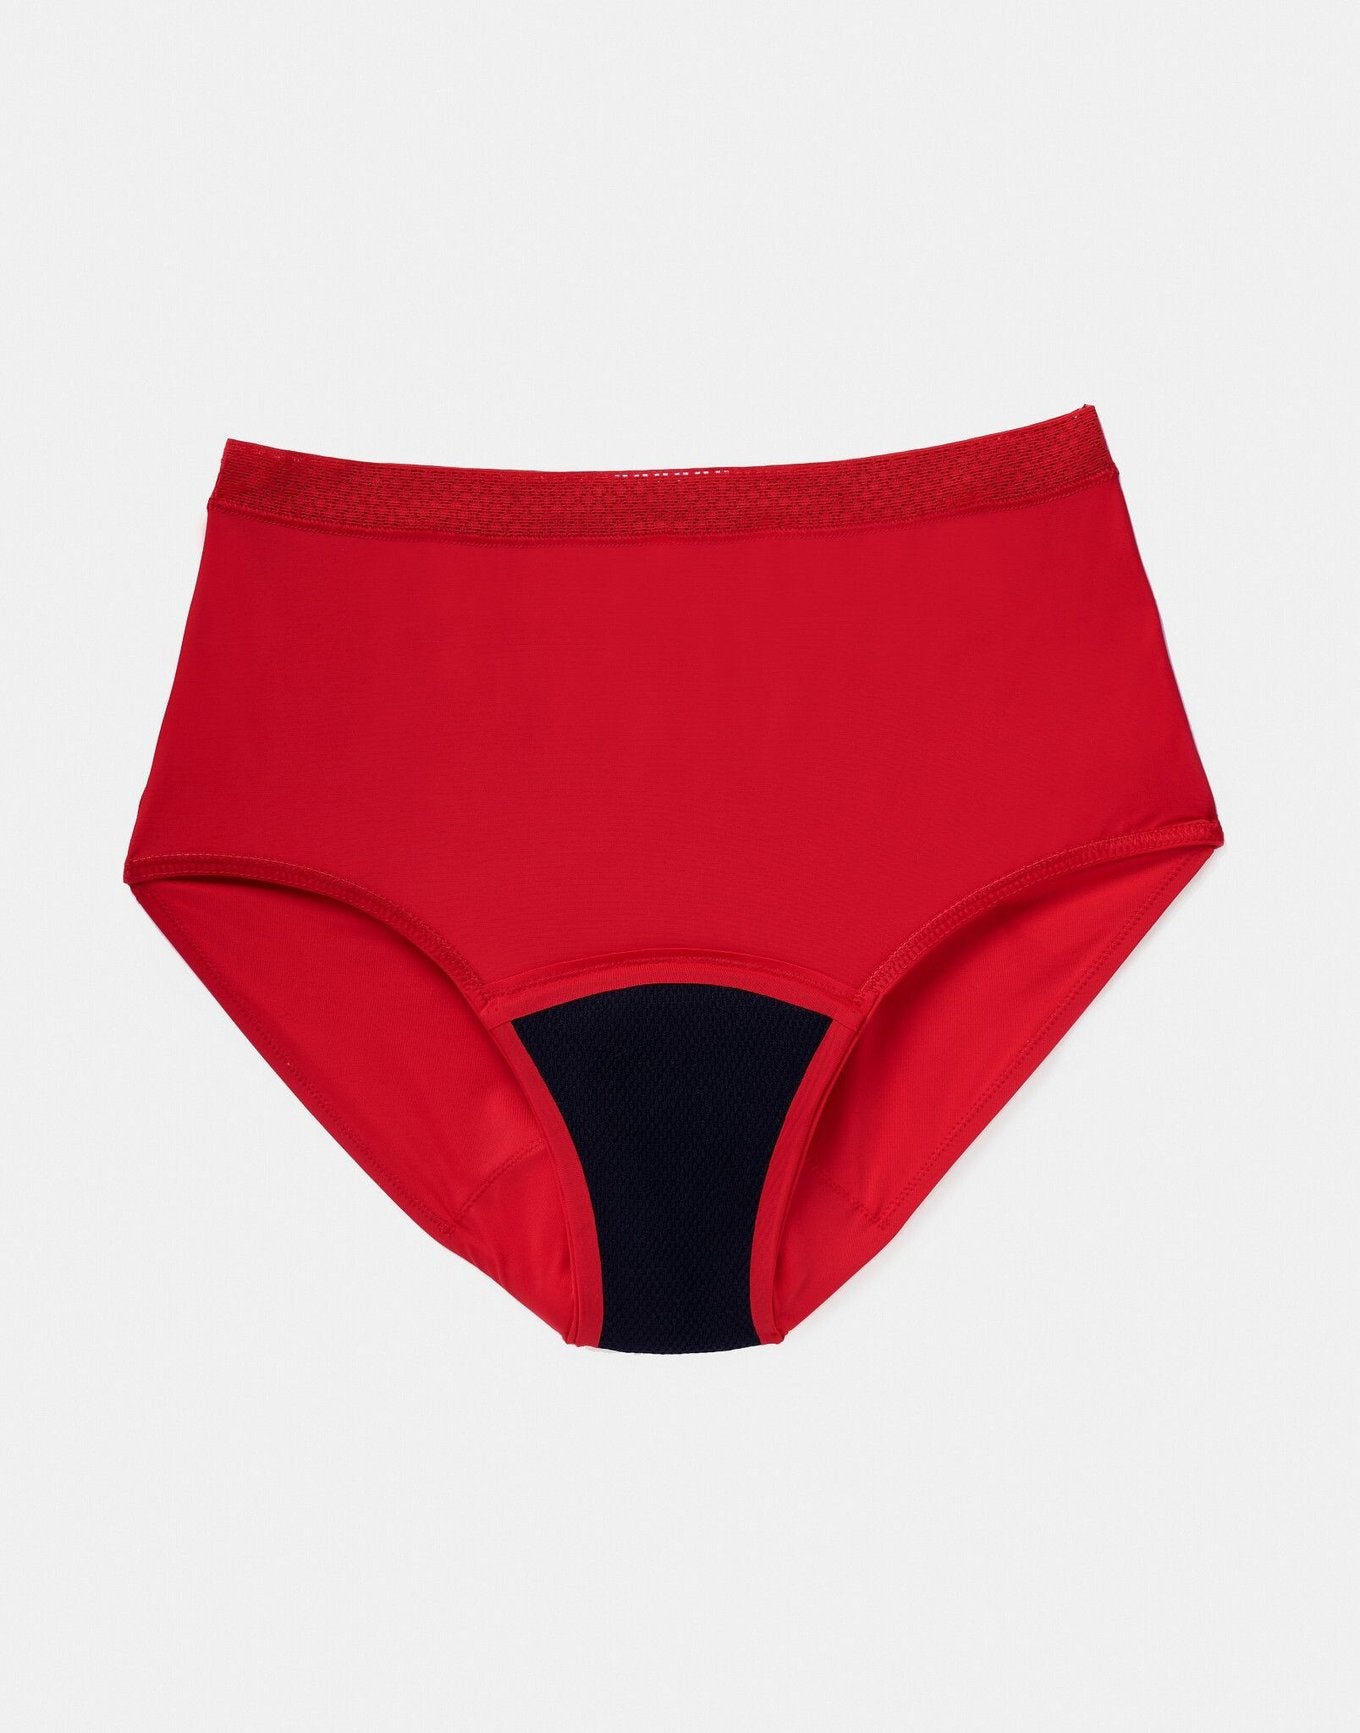 Joyja Jess period-proof panty in color Barbados Cherry and shape high waisted